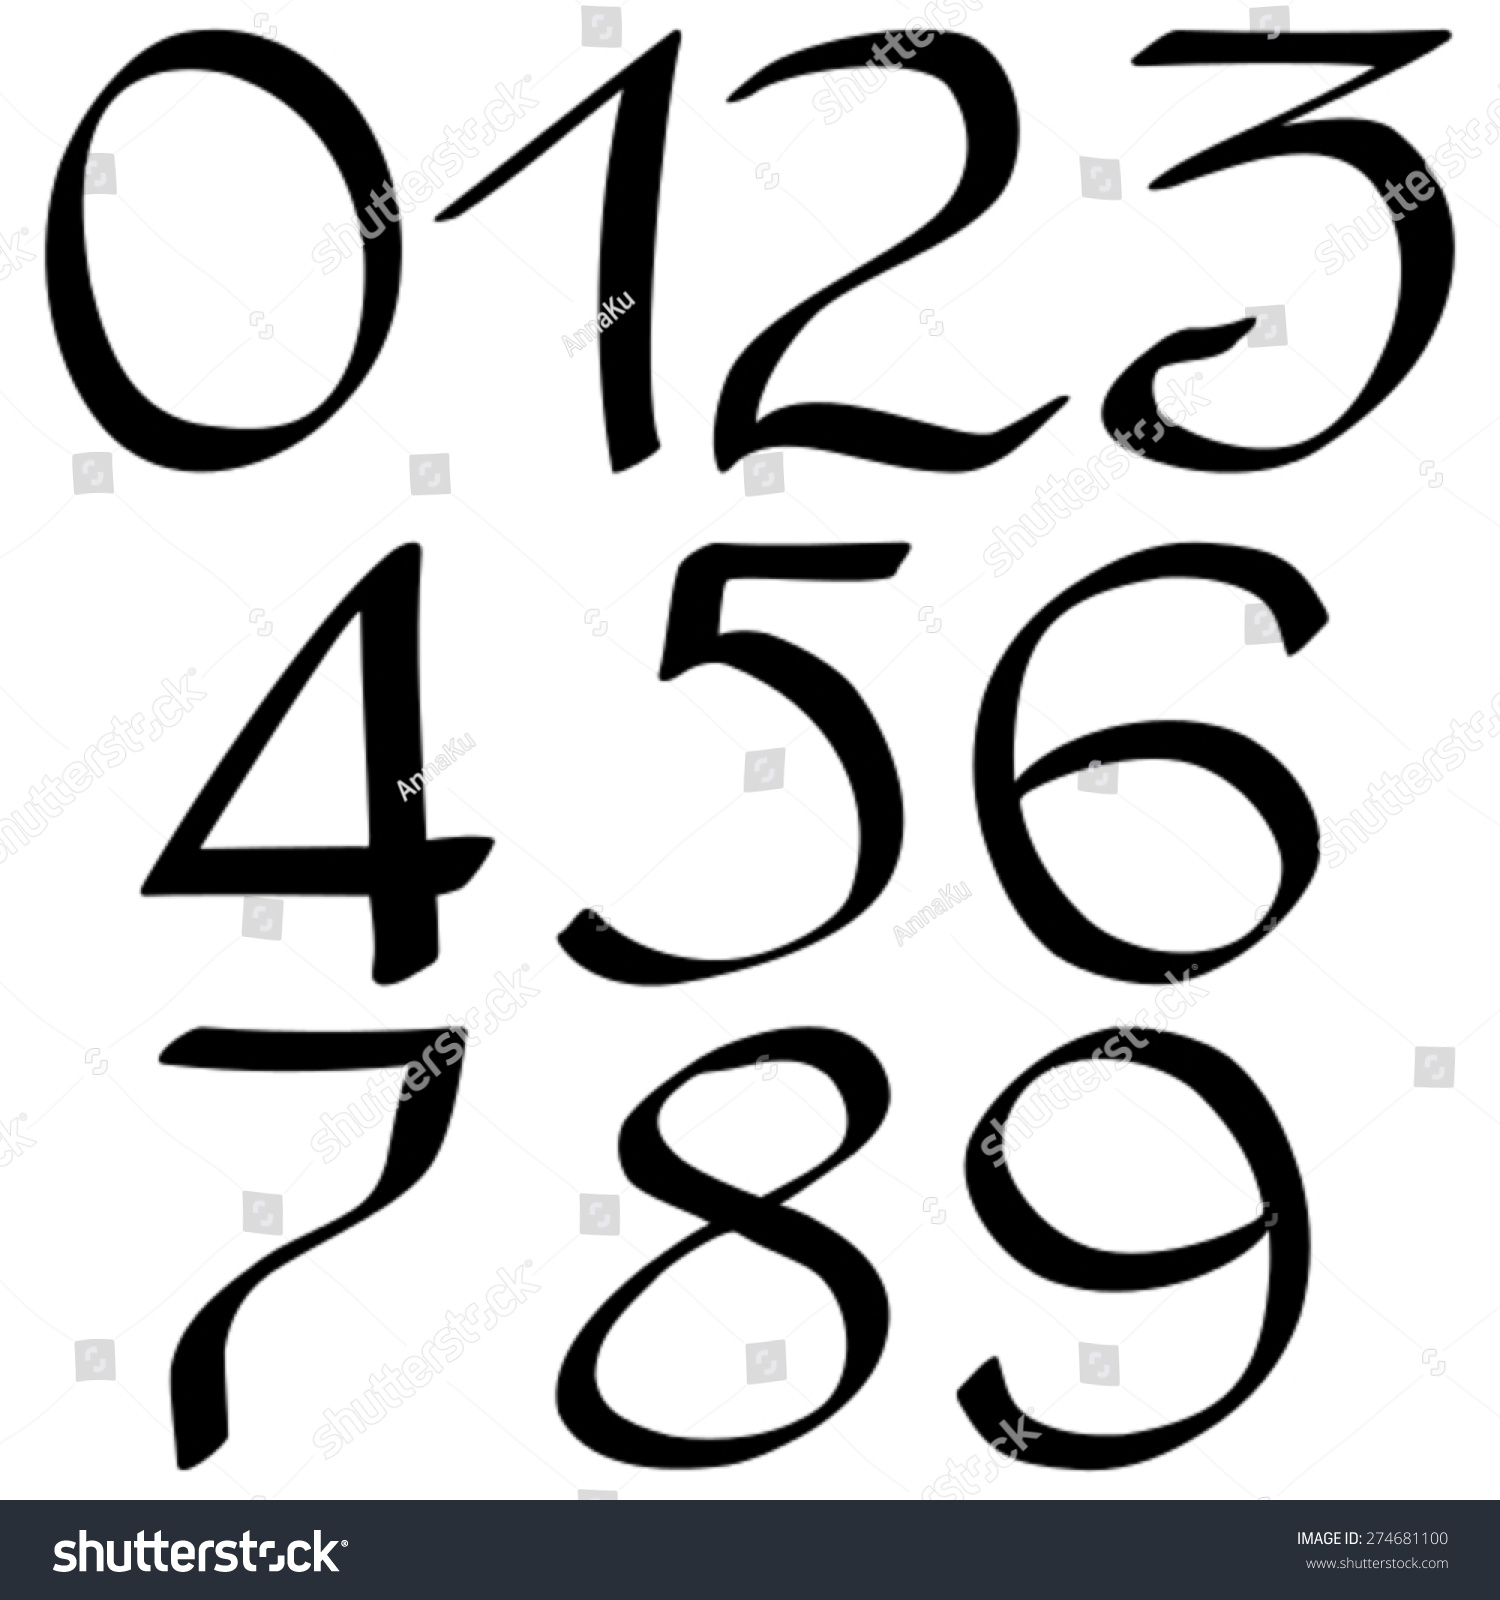 Characters Set. Vector Calligraphy Figures 0-9 Written With Ink And ...